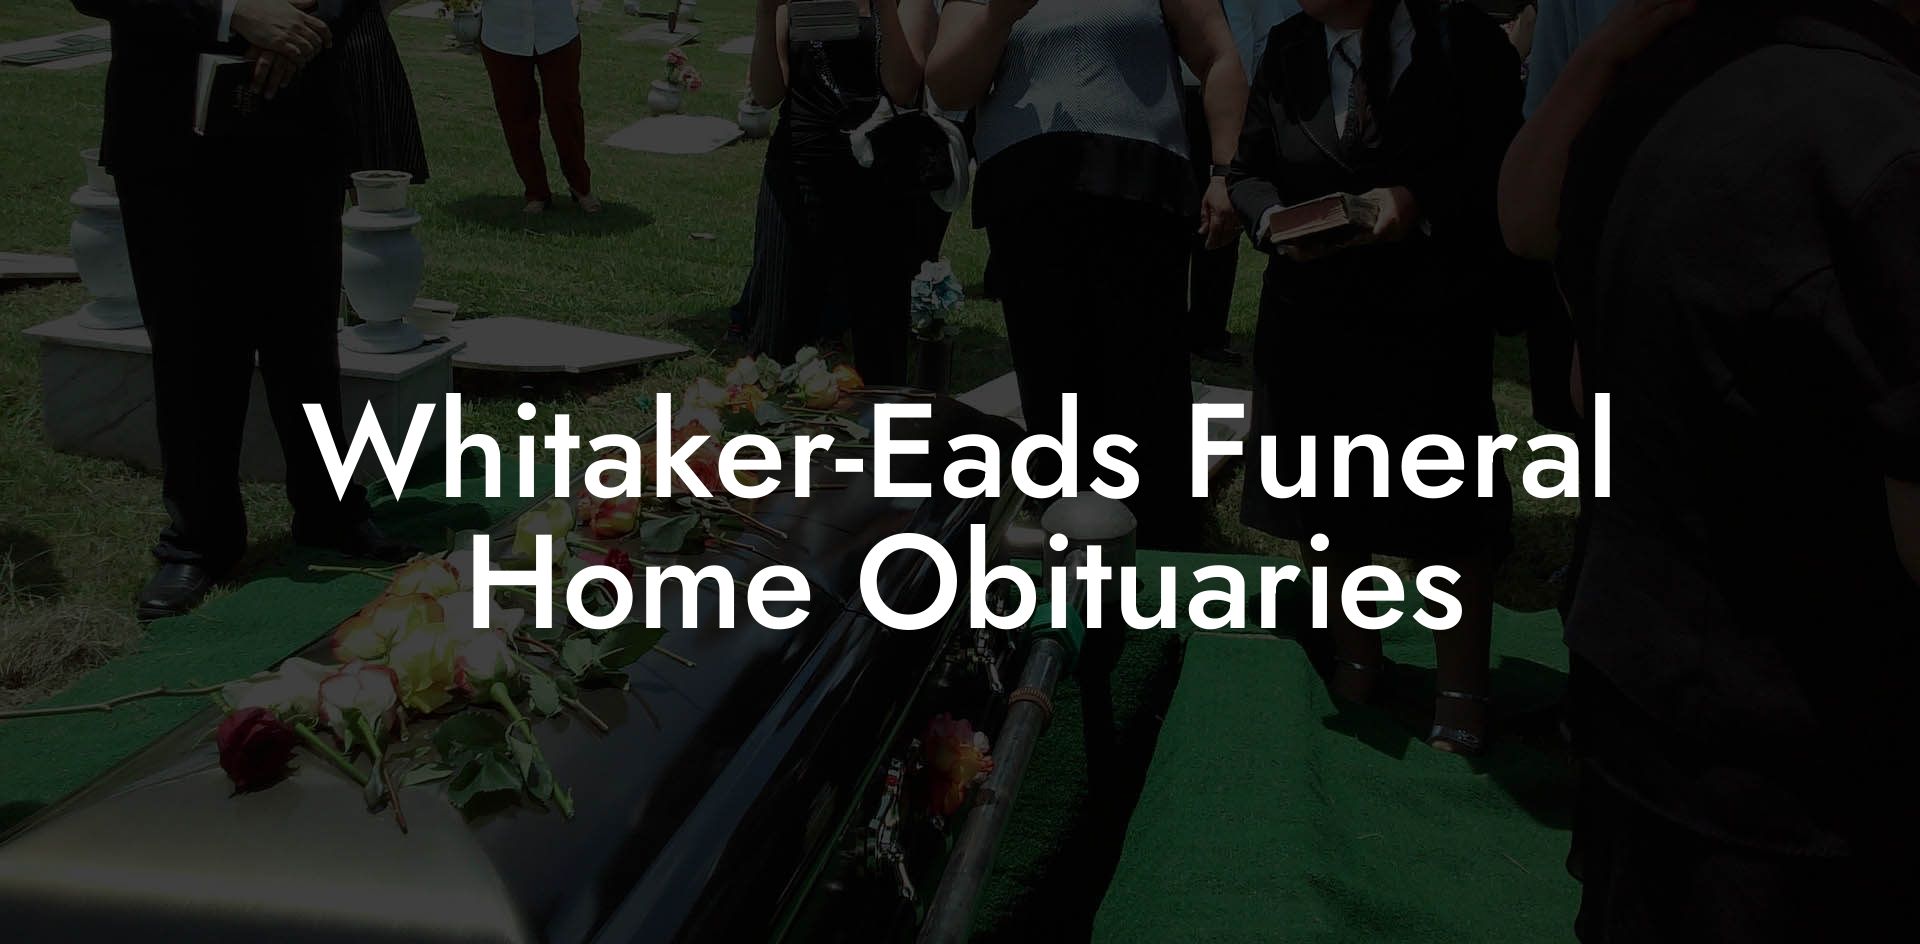 Whitaker-Eads Funeral Home Obituaries